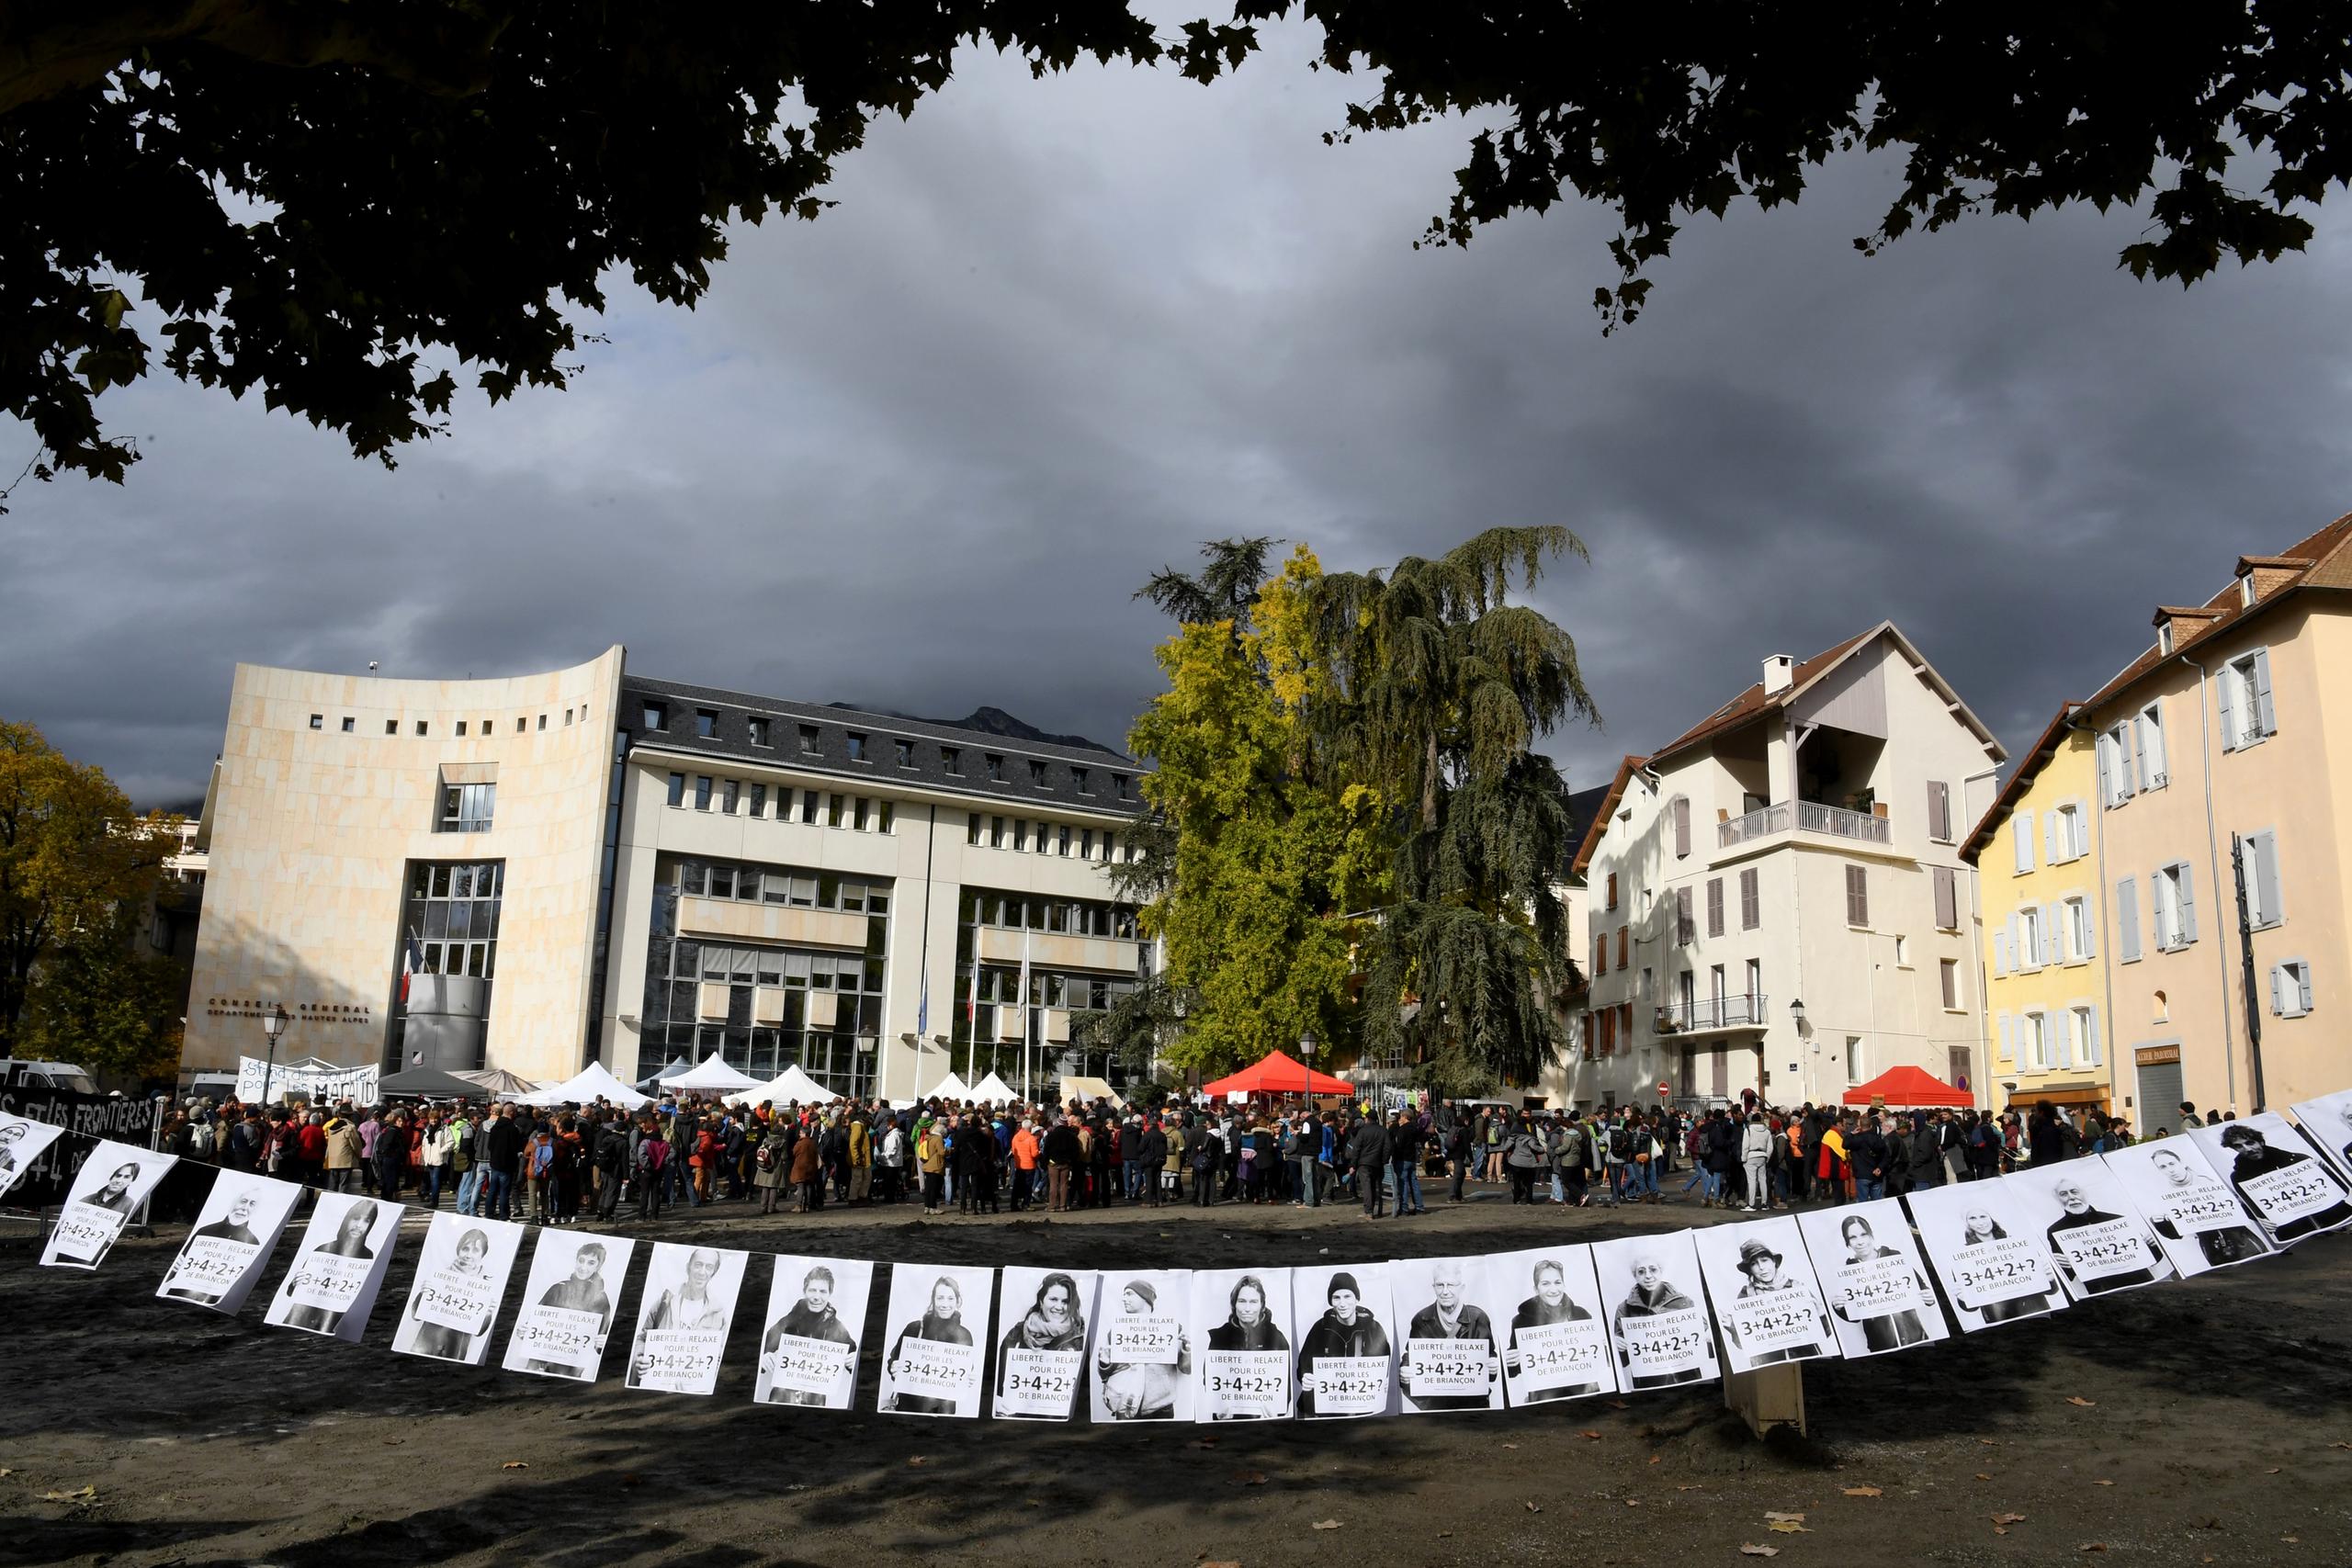 People wait outside the courthouse in Gap, France, on November 8